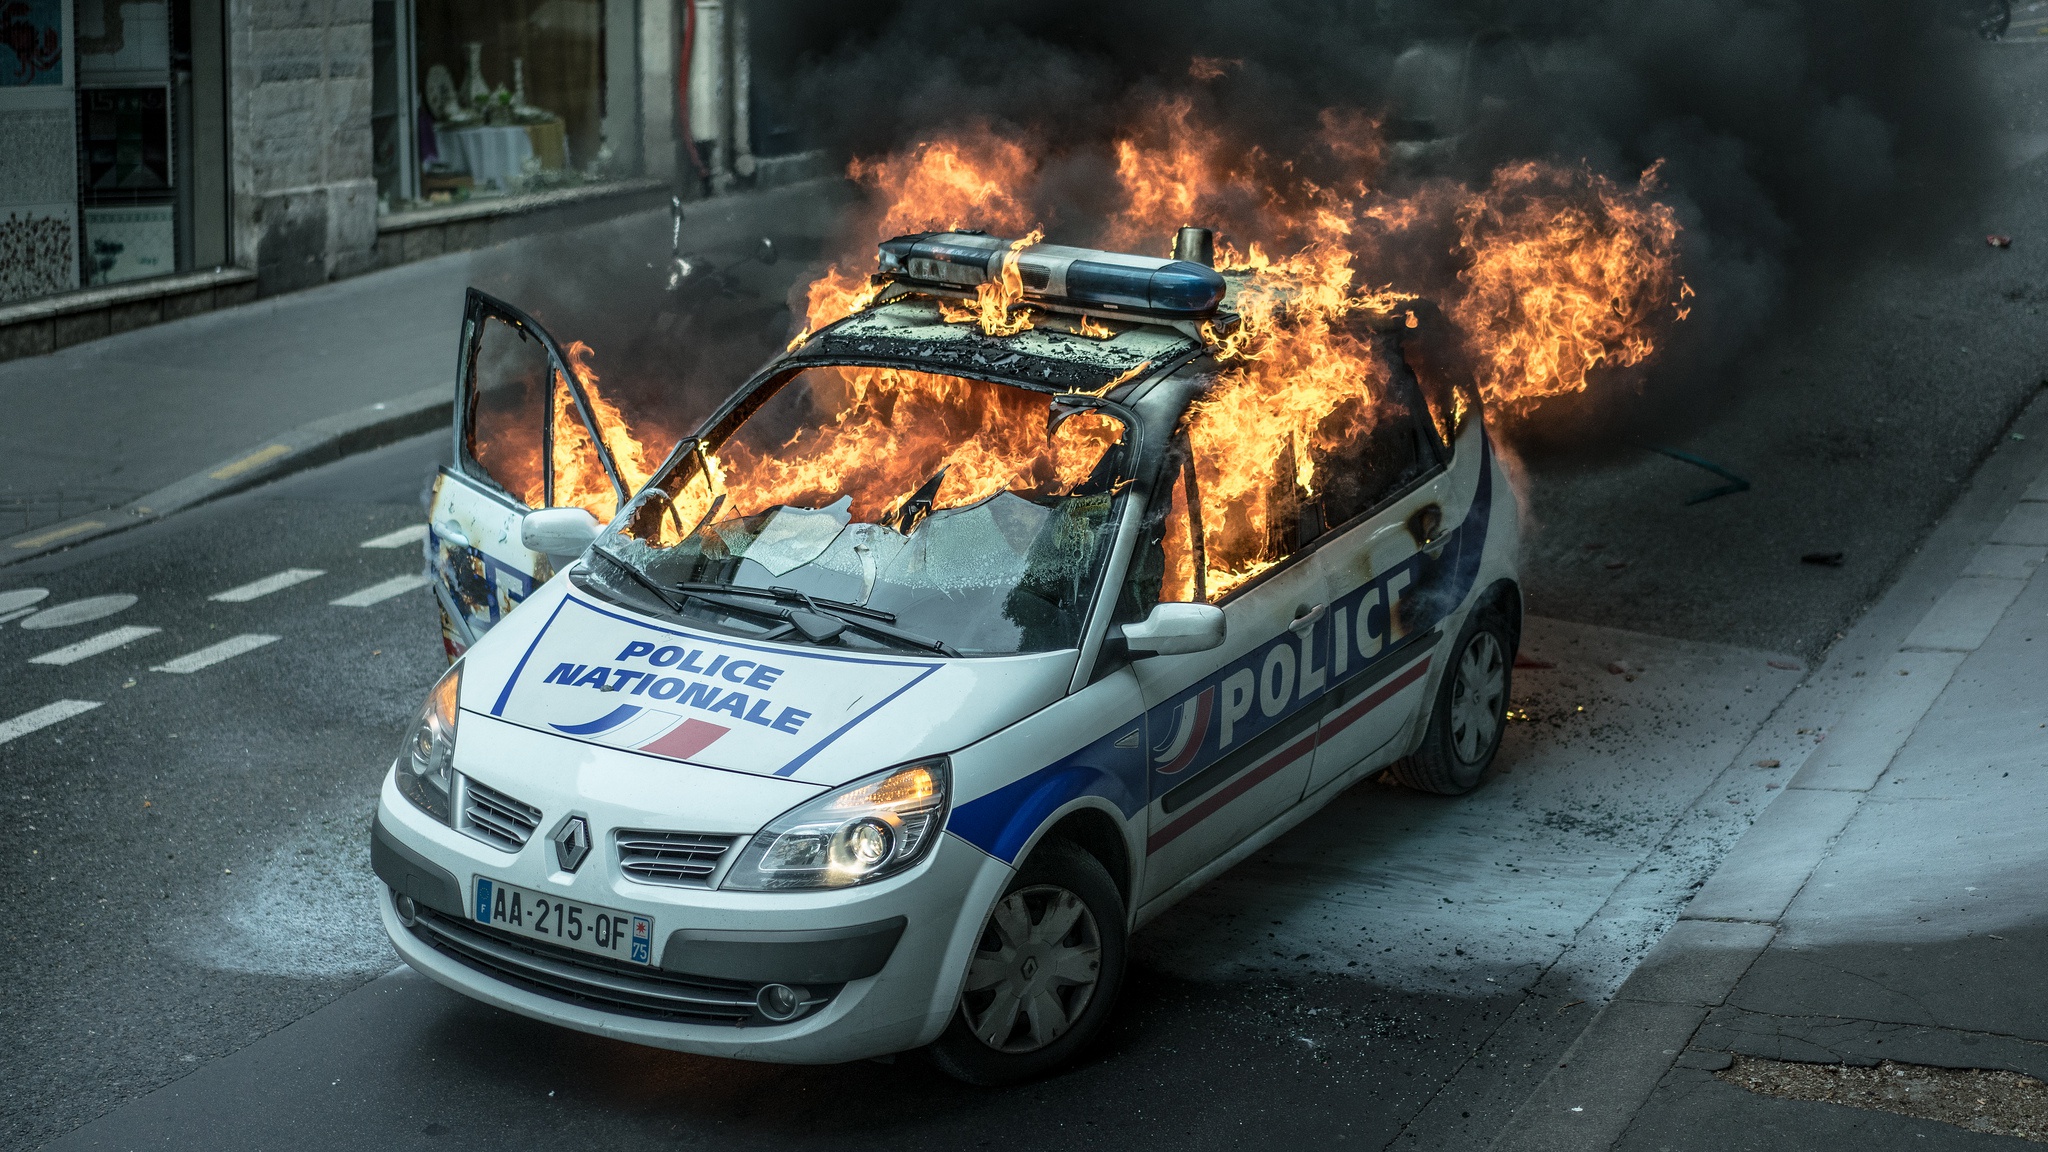 police, Car, Vehicle, Fire, France, Renault Wallpaper